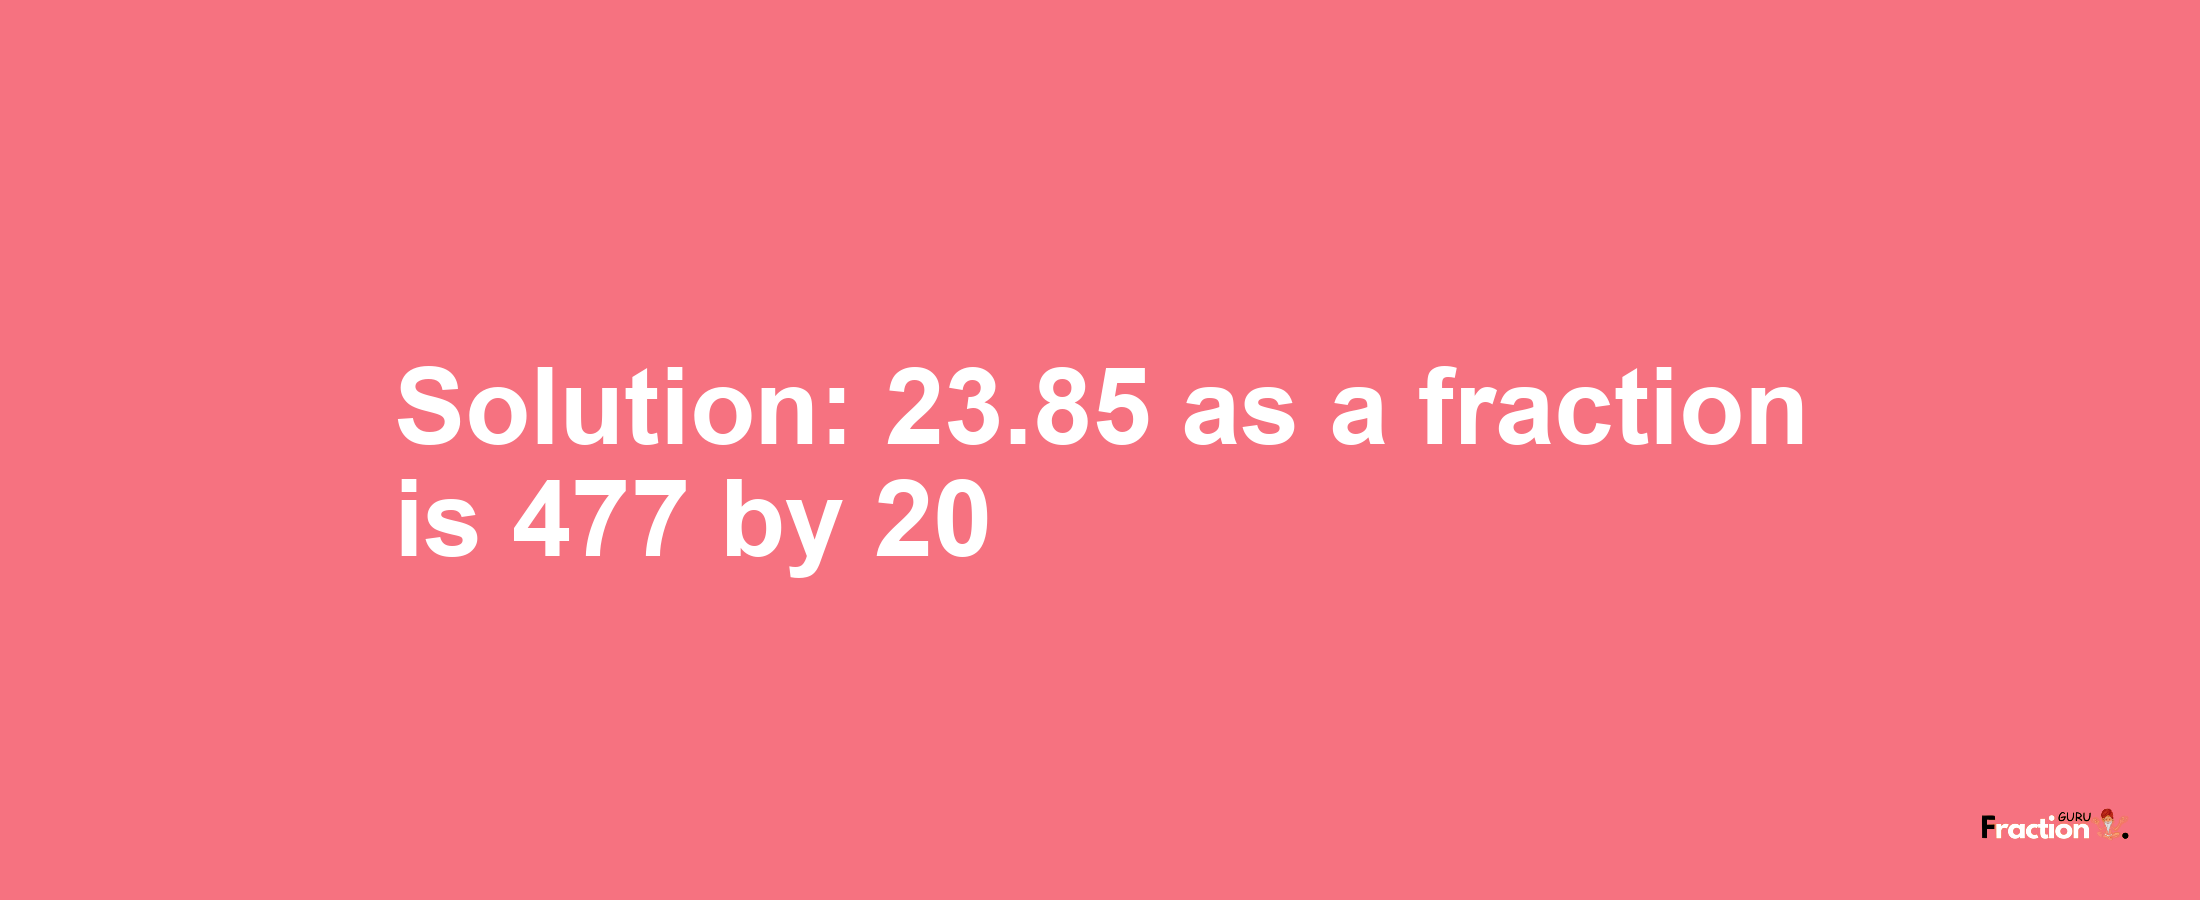 Solution:23.85 as a fraction is 477/20